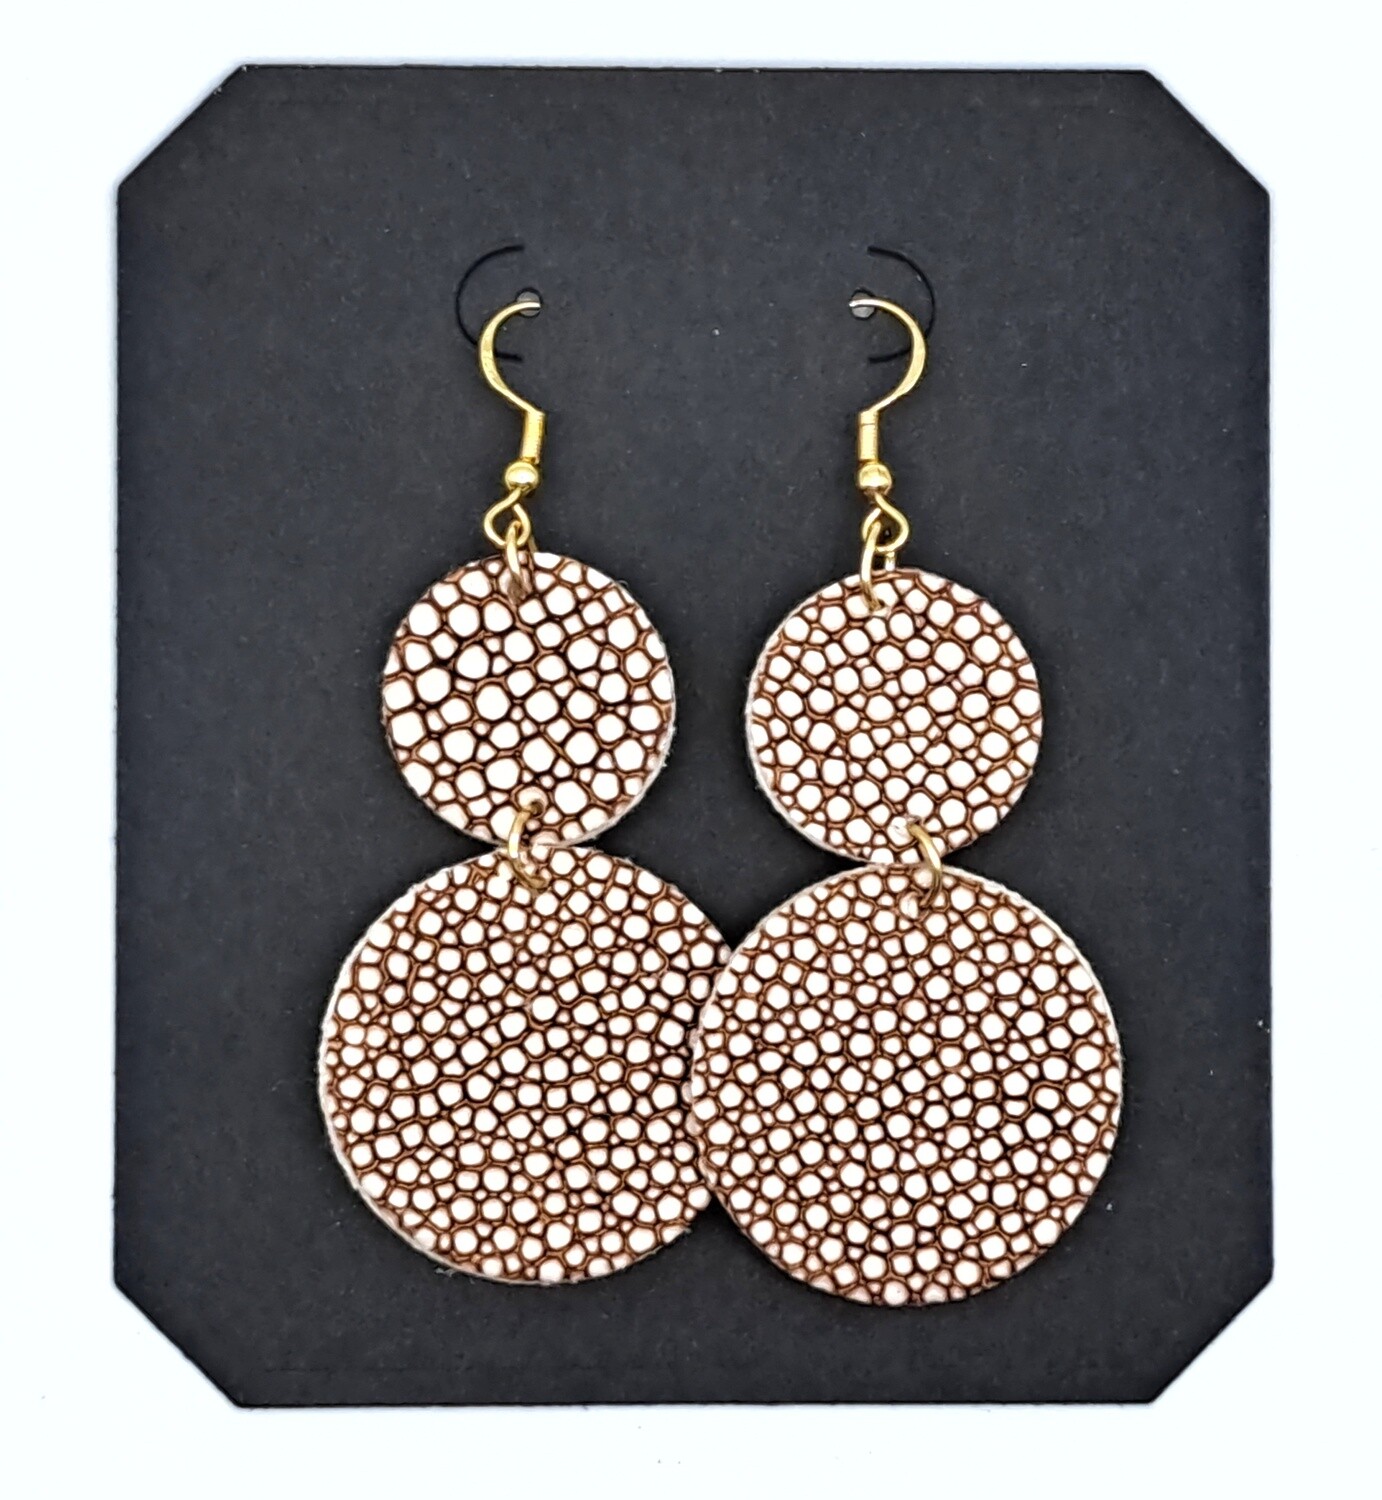 Handmade Faux Leather Circles Earrings